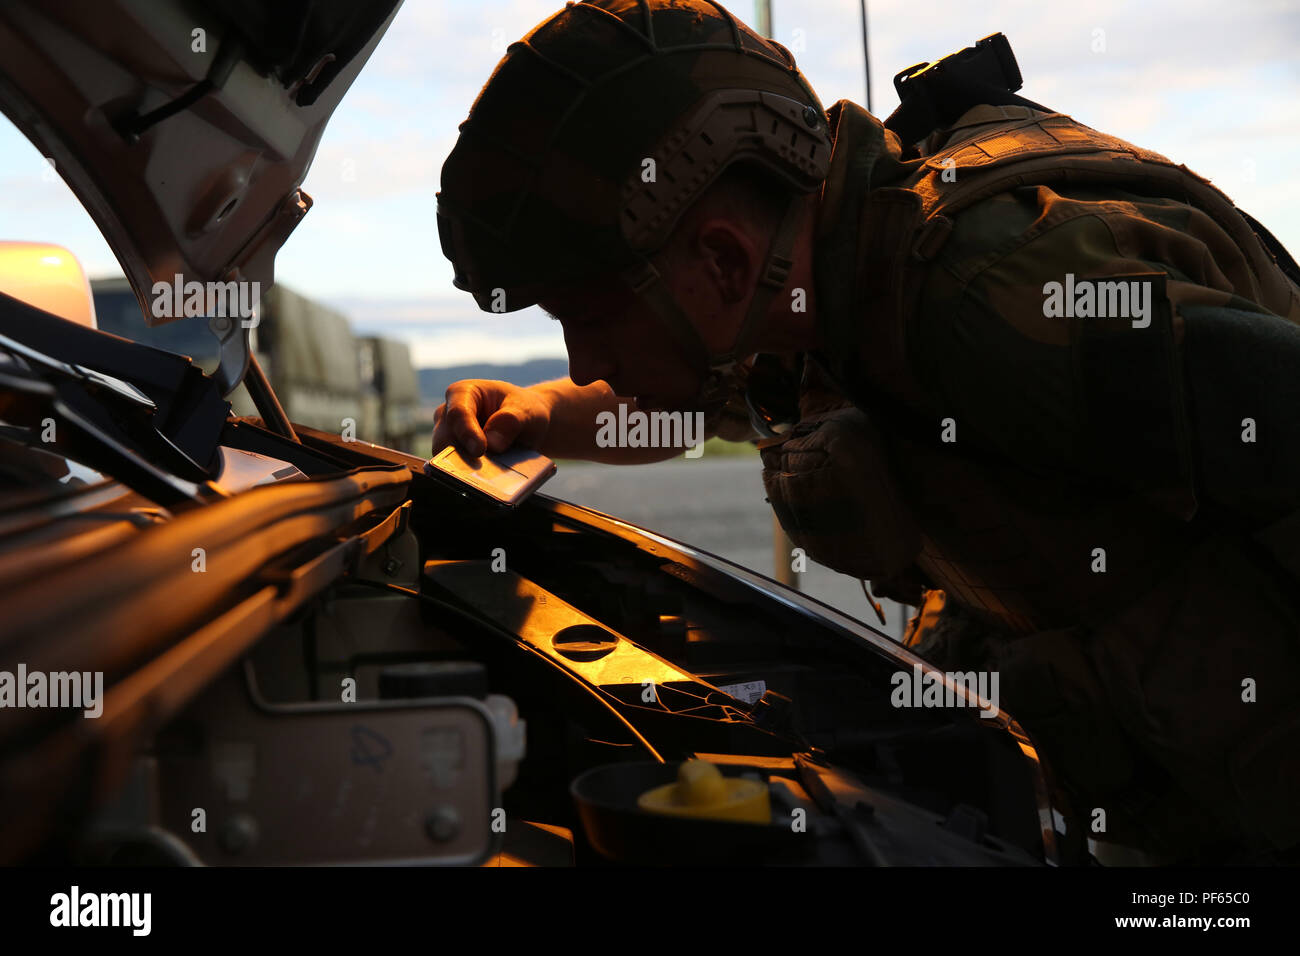 A Norwegian soldier searches for contraband under the hood of a vehicle during a multinational law enforcement exercise in Vaernes Garnison, Norway, Aug. 14, 2018. Service members practiced vehicle control and entry control point procedures used to identify and search vehicles and personnel entering a military installation. The training, conducted by U.S. Marines with Marine Rotational Force-Europe 18.1, taught American, Norwegian and British military members how to properly set up and execute the checkpoints. (U.S. Marine Corps photo by Cpl. Gloria Lepko/Released) Stock Photo